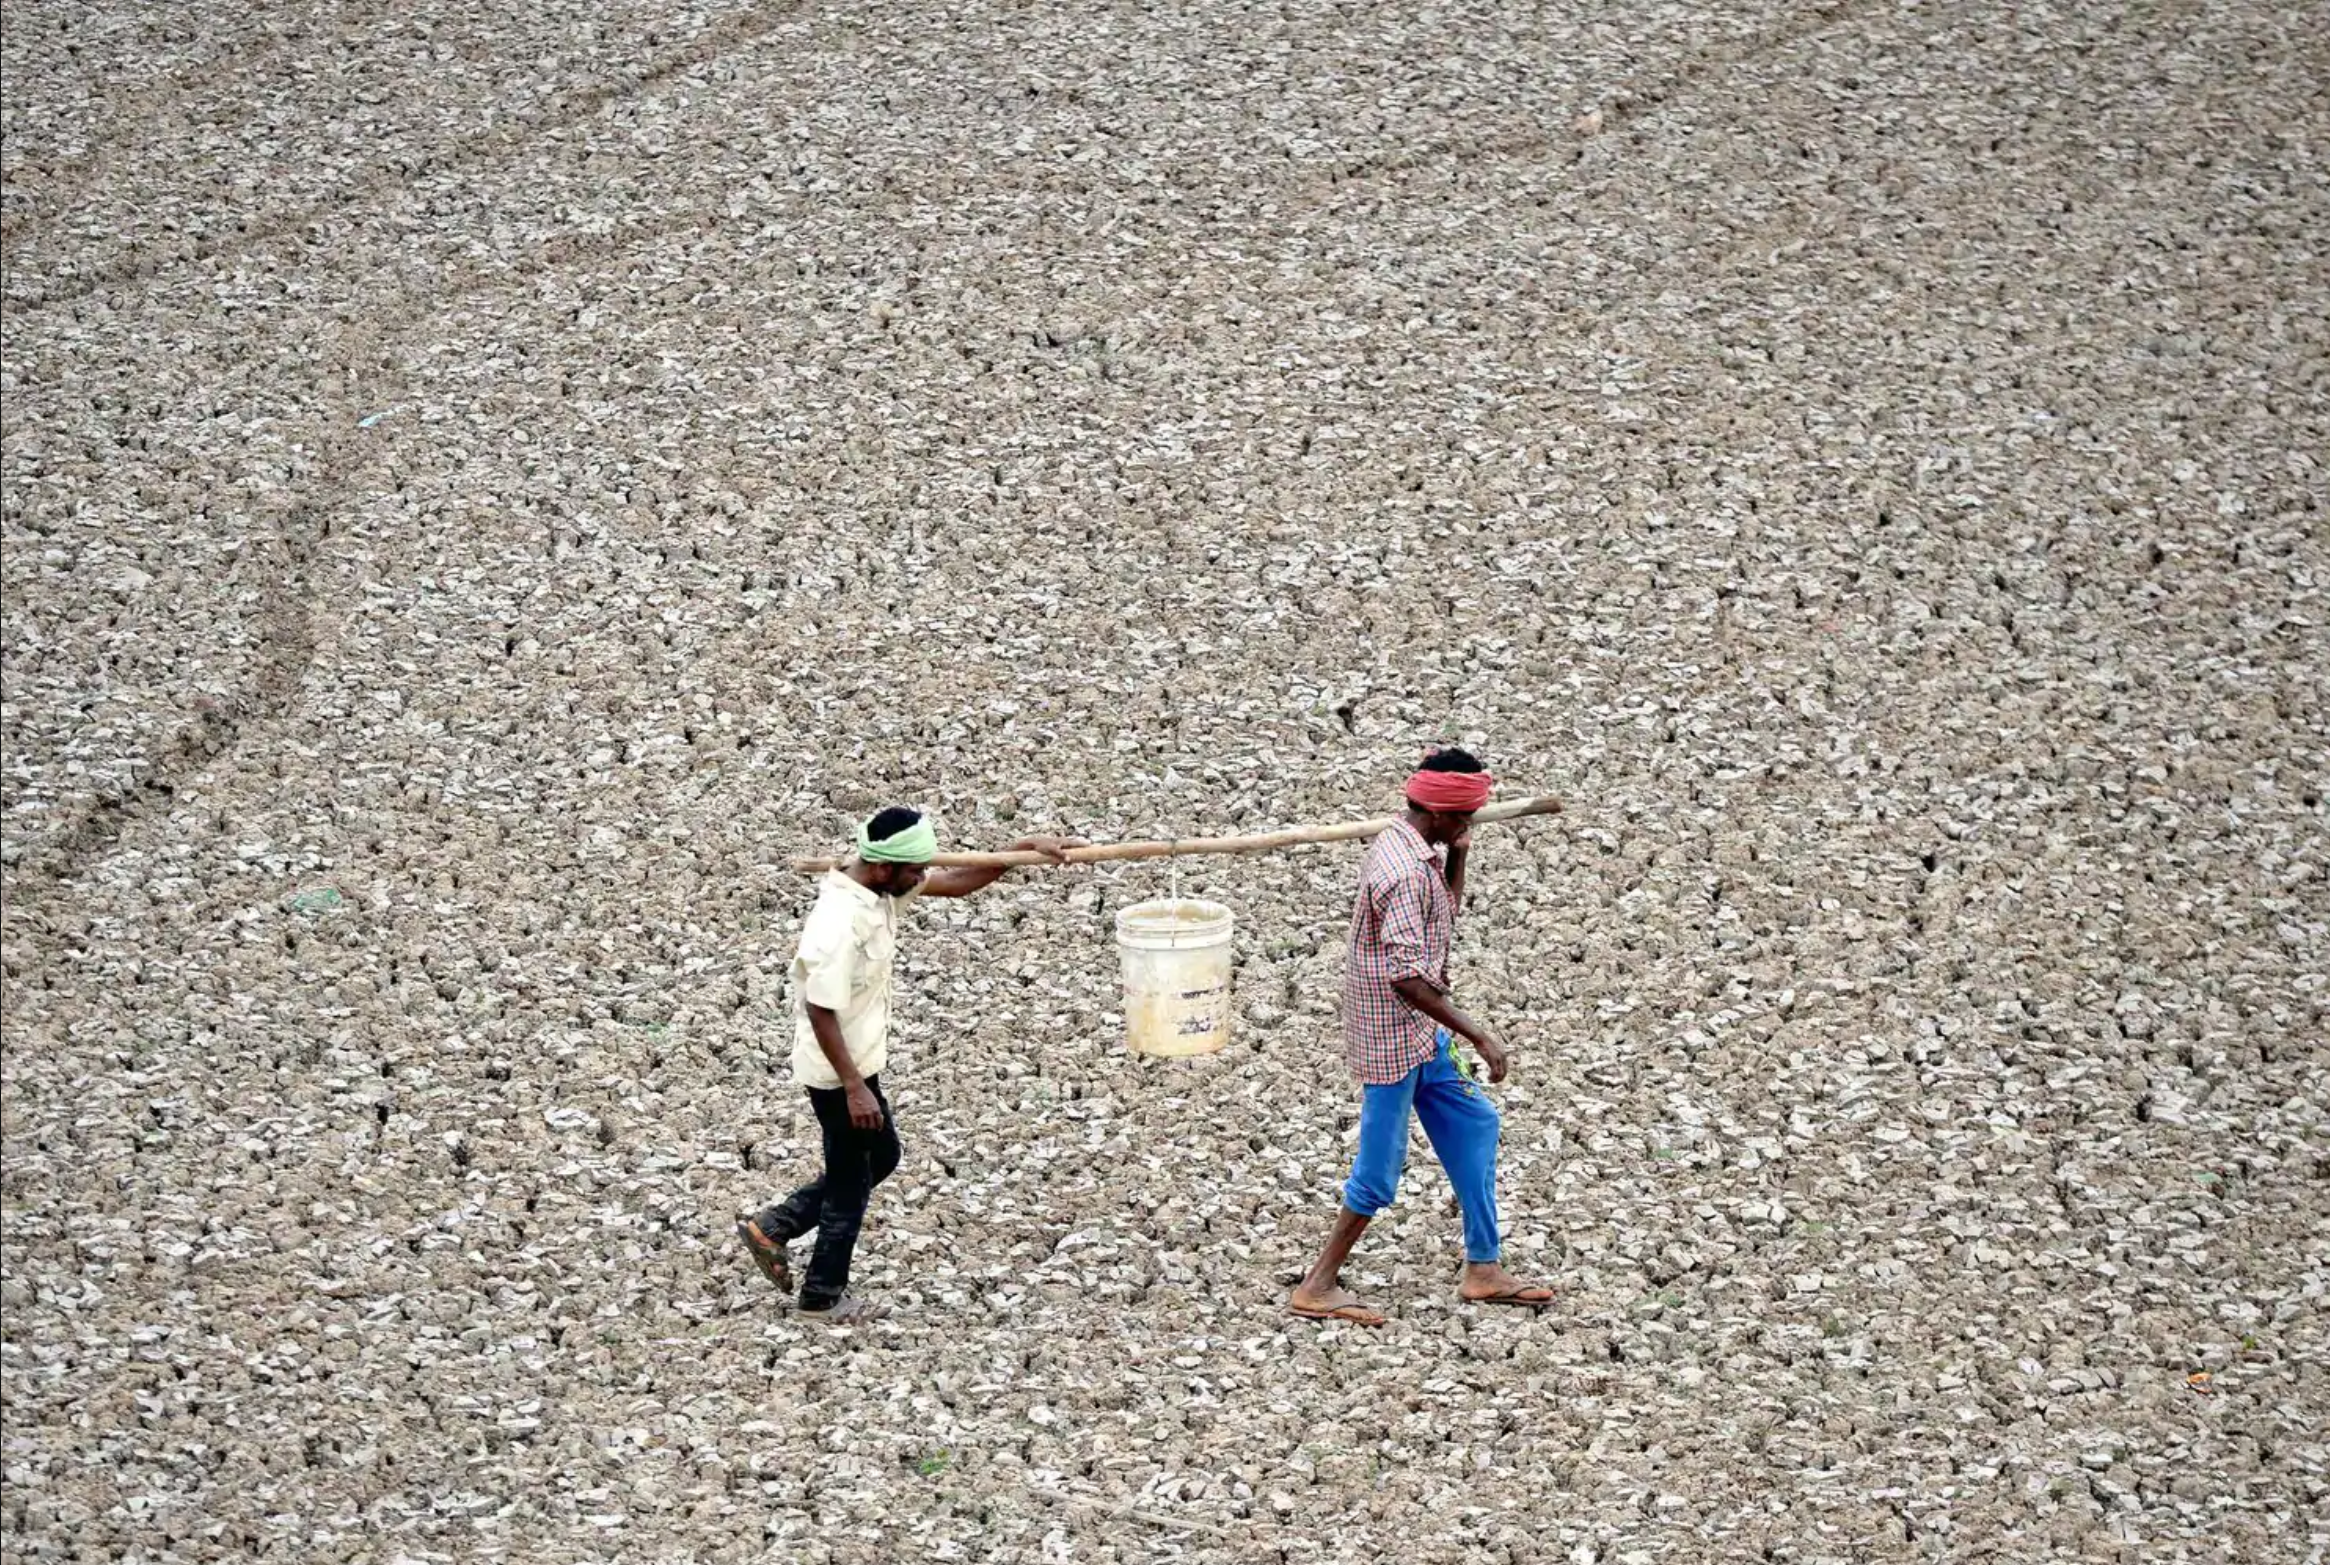 Workers carry the last bucketful of water from a small pond in the dried-out Puzhal reservoir on the outskirts of the Indian city of Chennai. Photo: Arun Sankar/ AFP / Getty Images